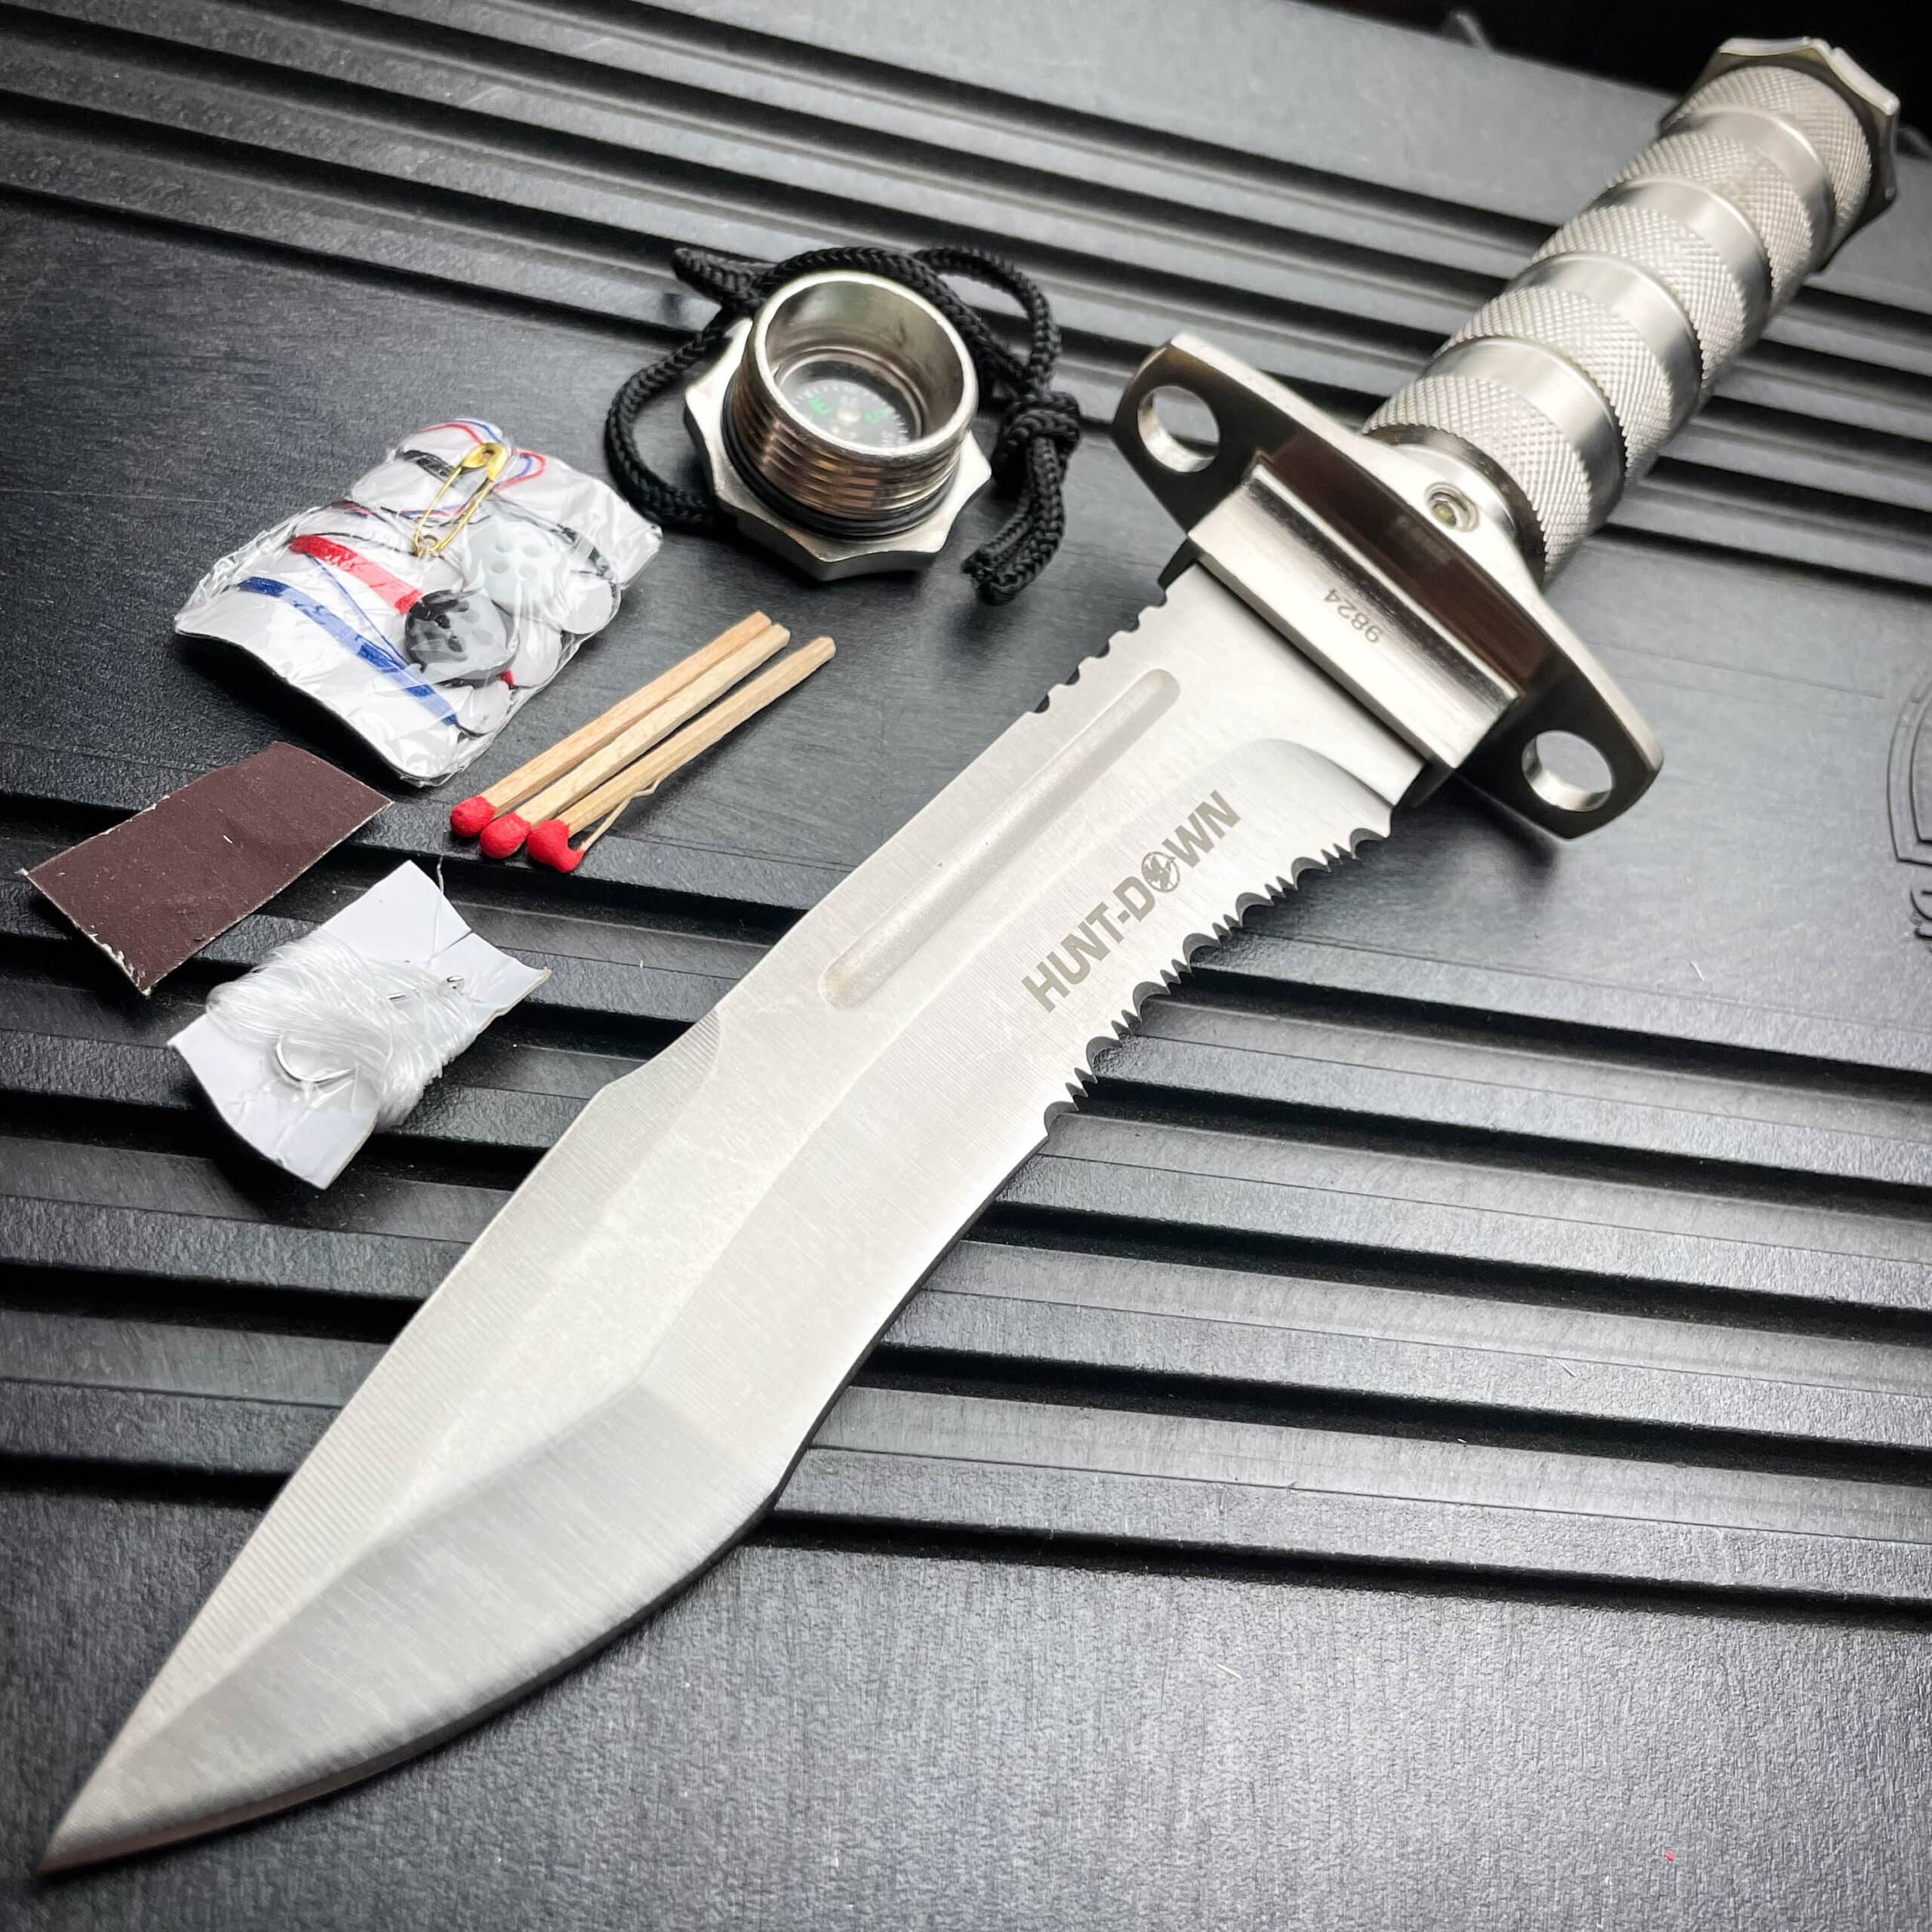 12" Tactical Camping Hunting Rambo Fixed Blade Knife Chrome Bowie + Survival KIT